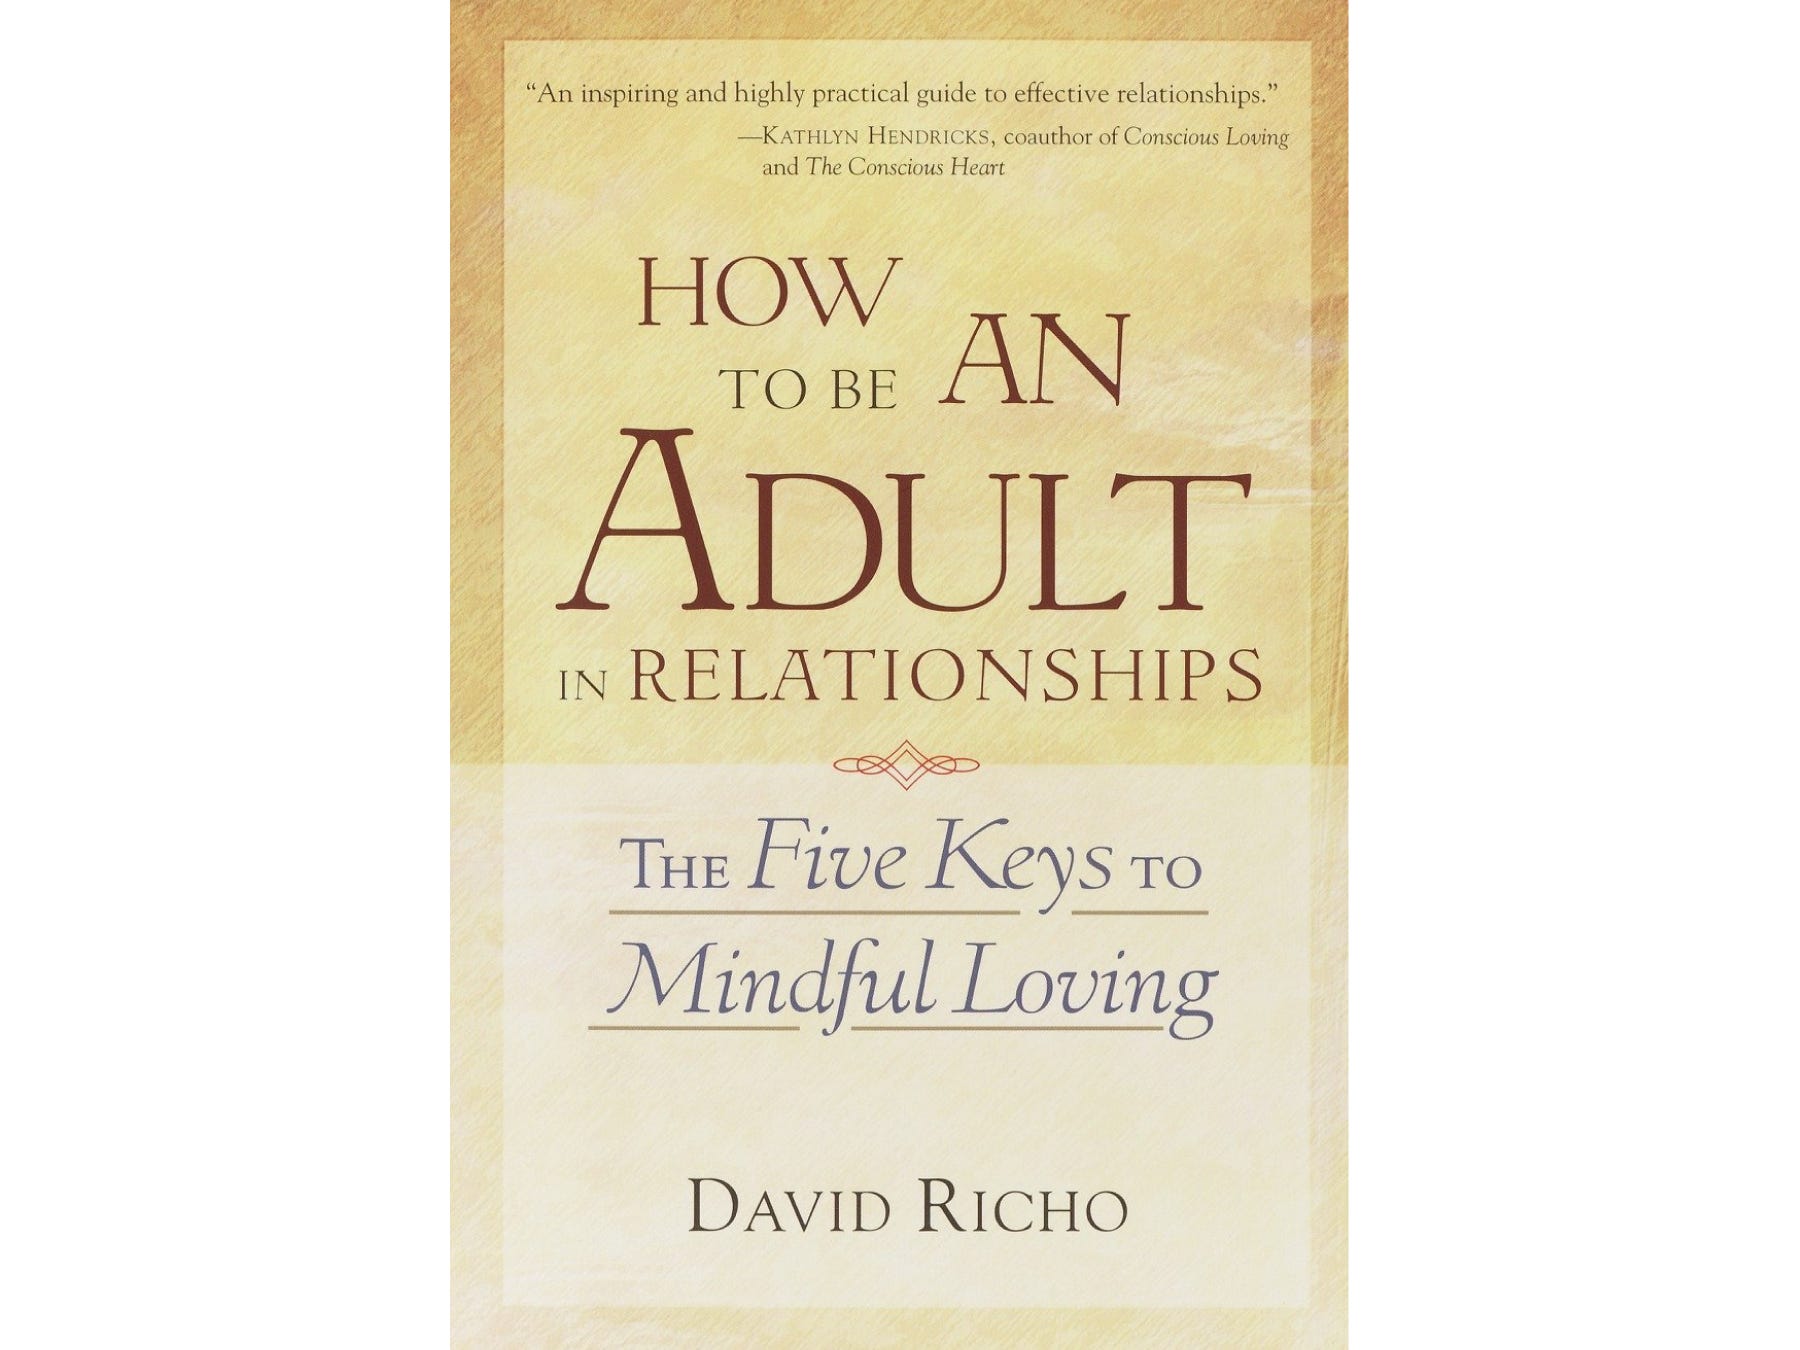 How to be an Adult in Relationships by David Richo